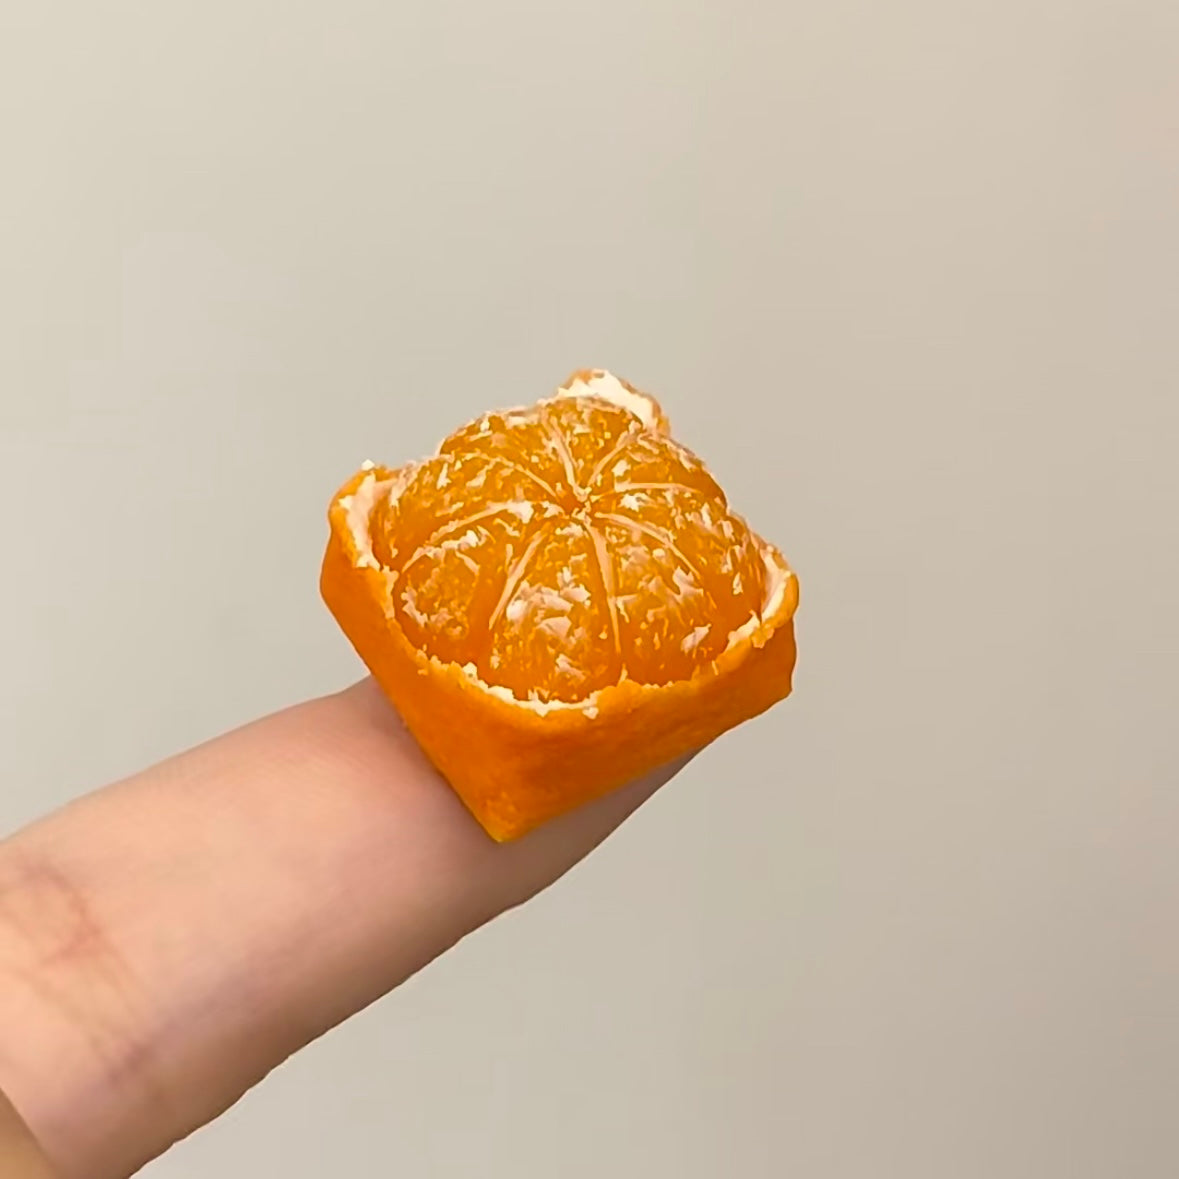 The simulated orange keycaps are like a real little orange on your keycaps, it's like I can smell the orange through the computer screen.